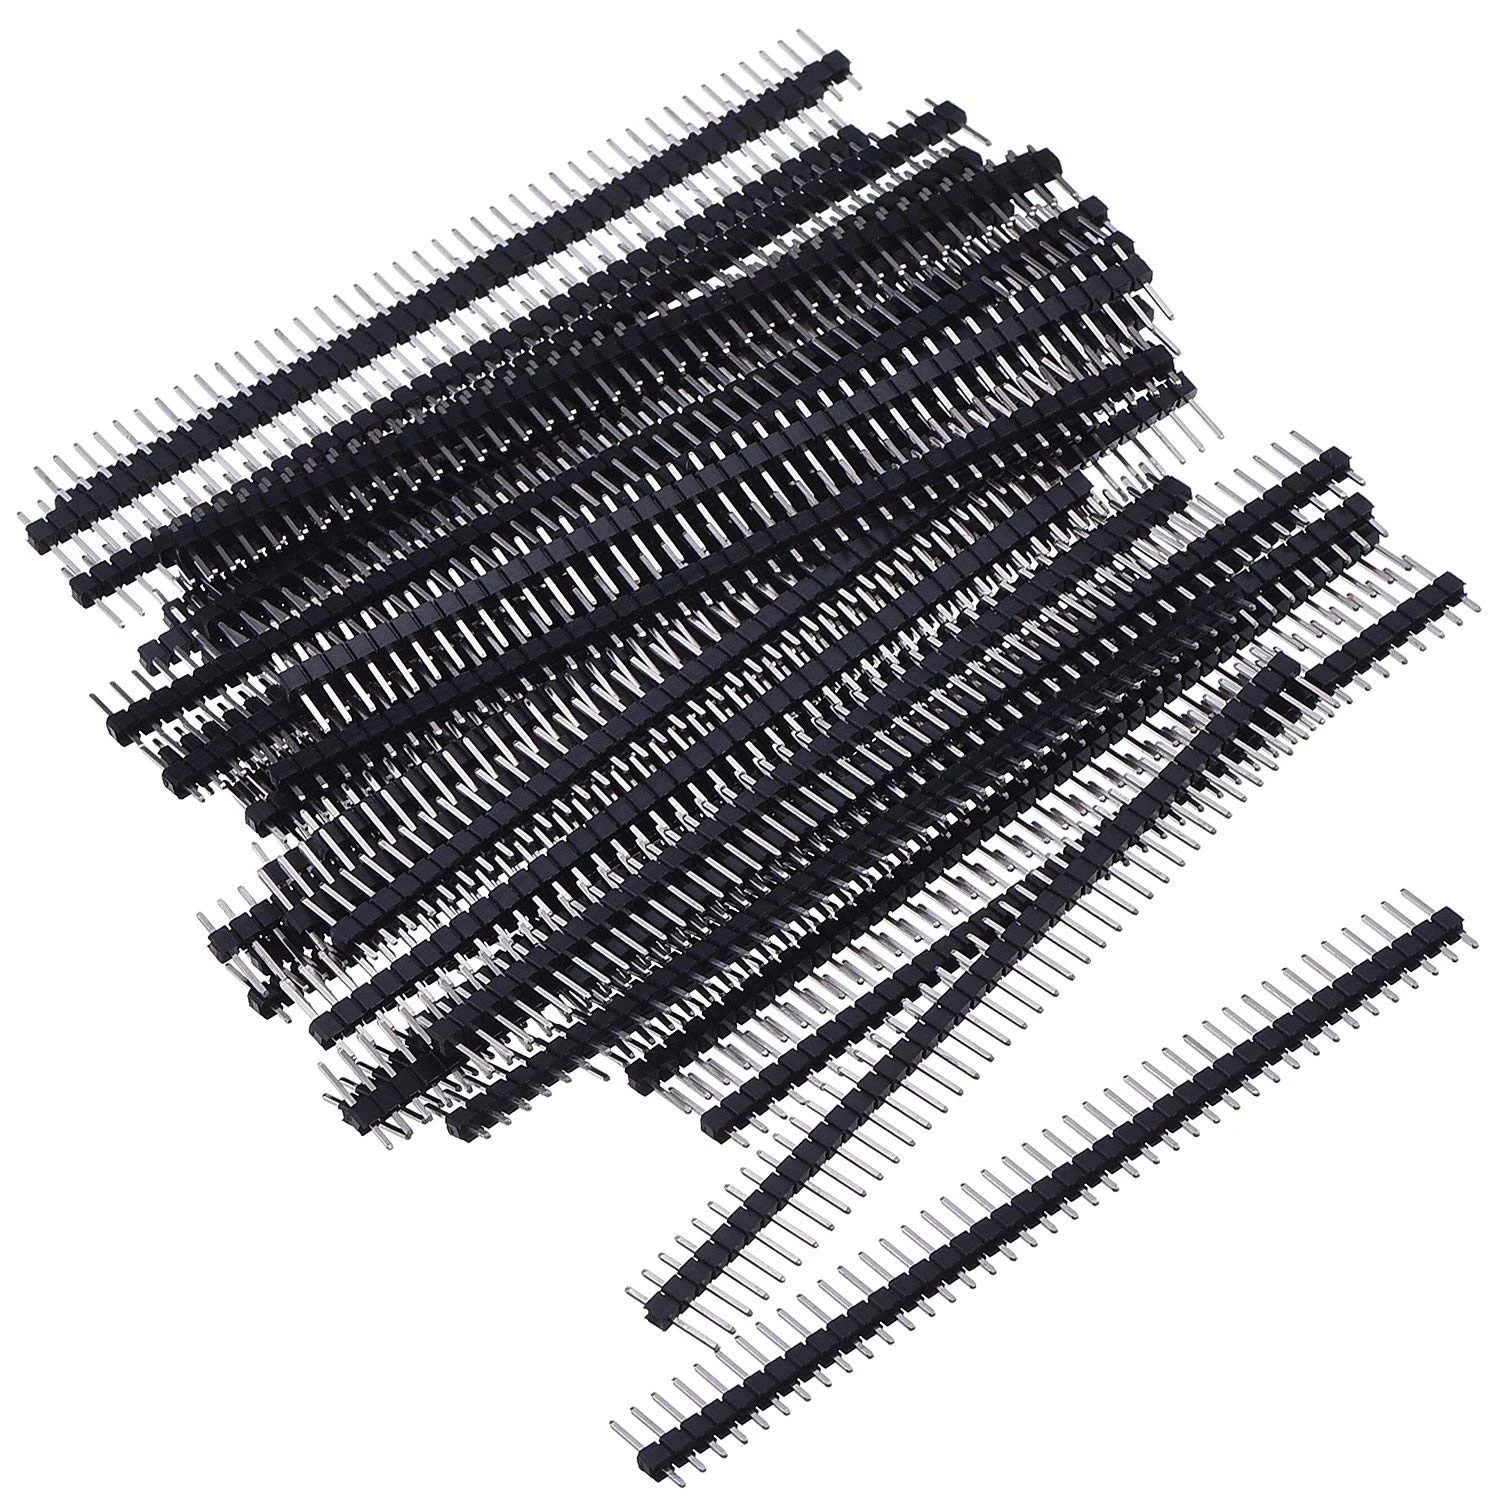 

10/20pcs 40 Pin 1x40 Single Row Male 2.54 Breakable Pin Header JST Connector Strip For Arduino Black